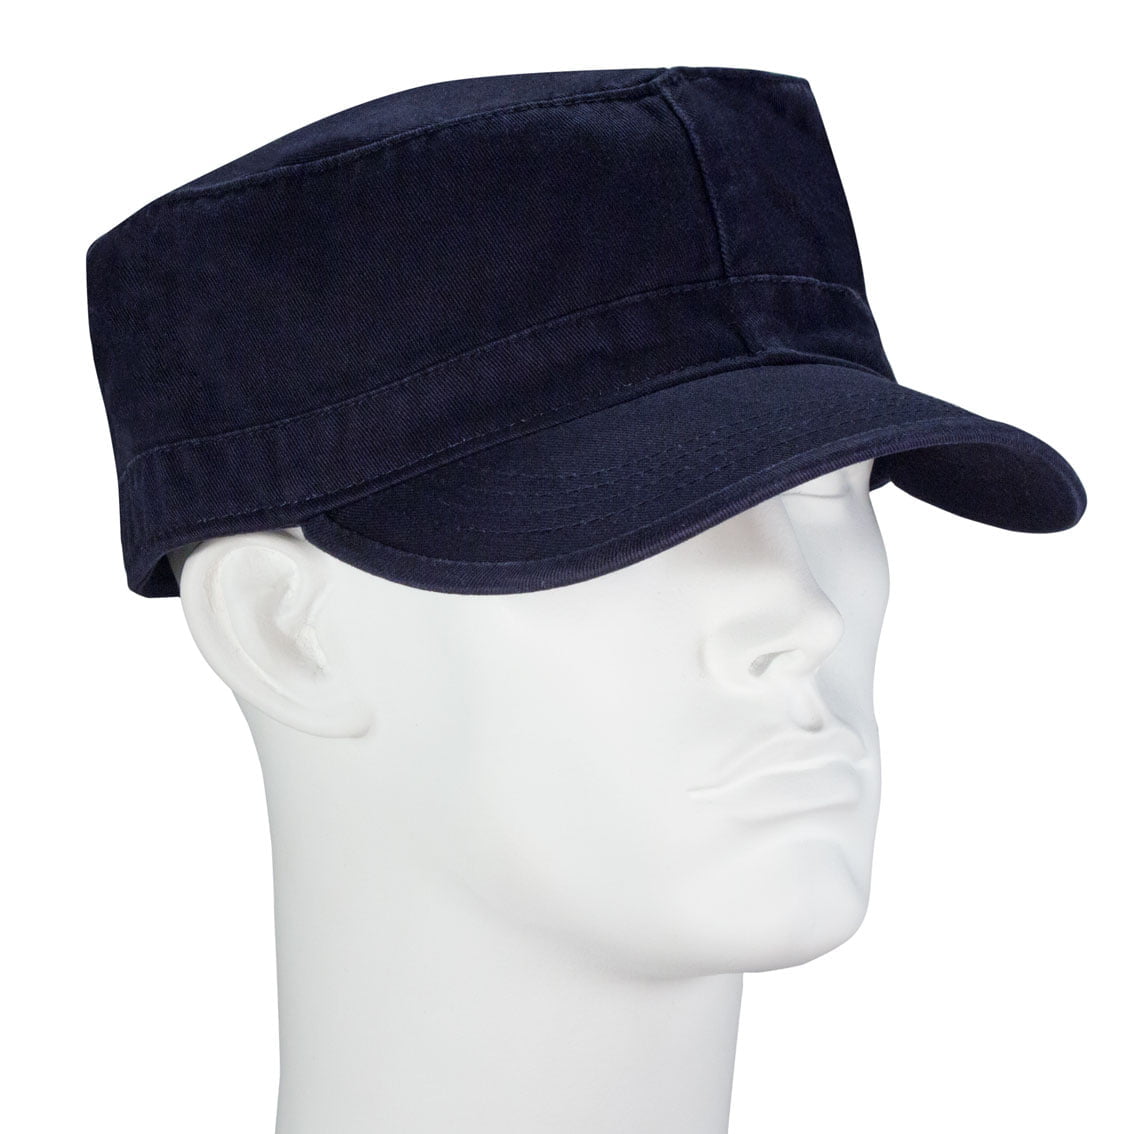 1pc Navy Solid Castro Military Fatigue Army Hat - Fitted - Unconstructed - 100% Cotton